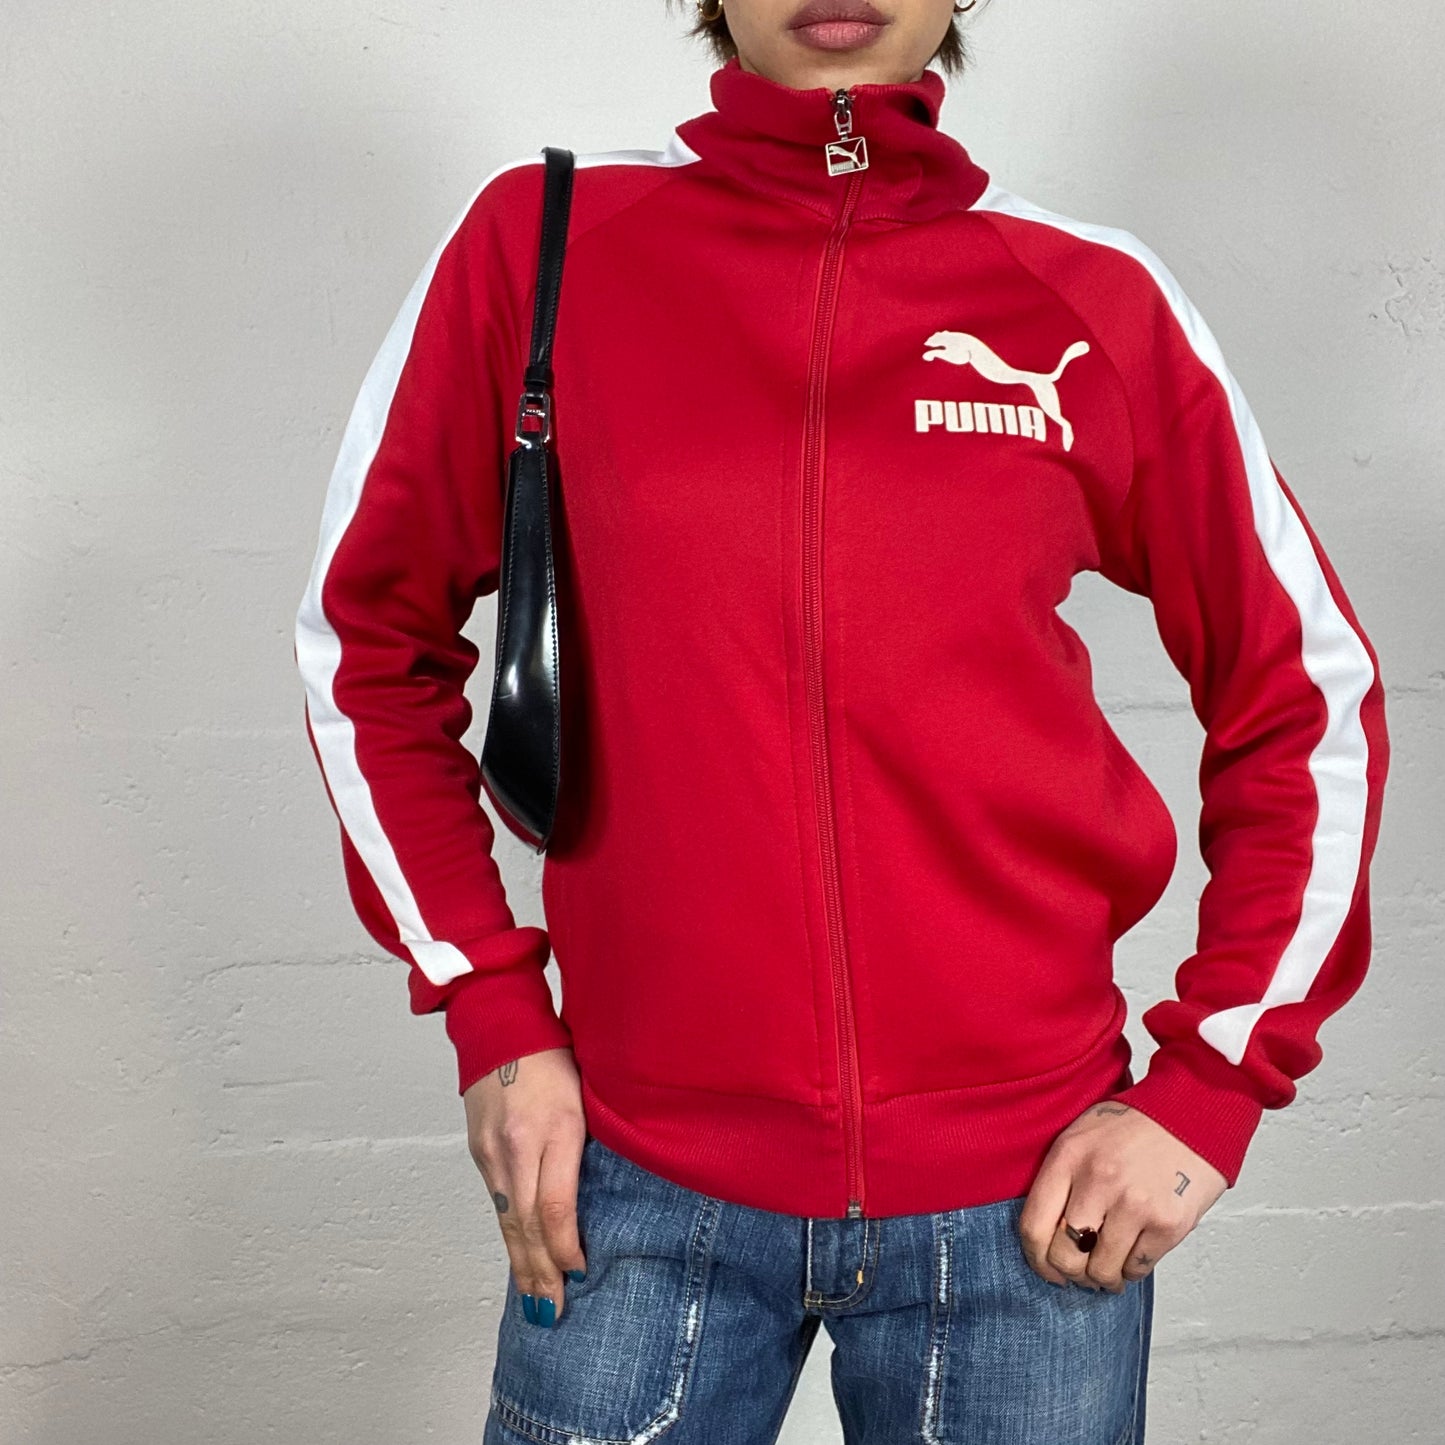 Vintage 2000's Puma Sporty Red Zip Up Oversized Sweater with White Brand Print (M)